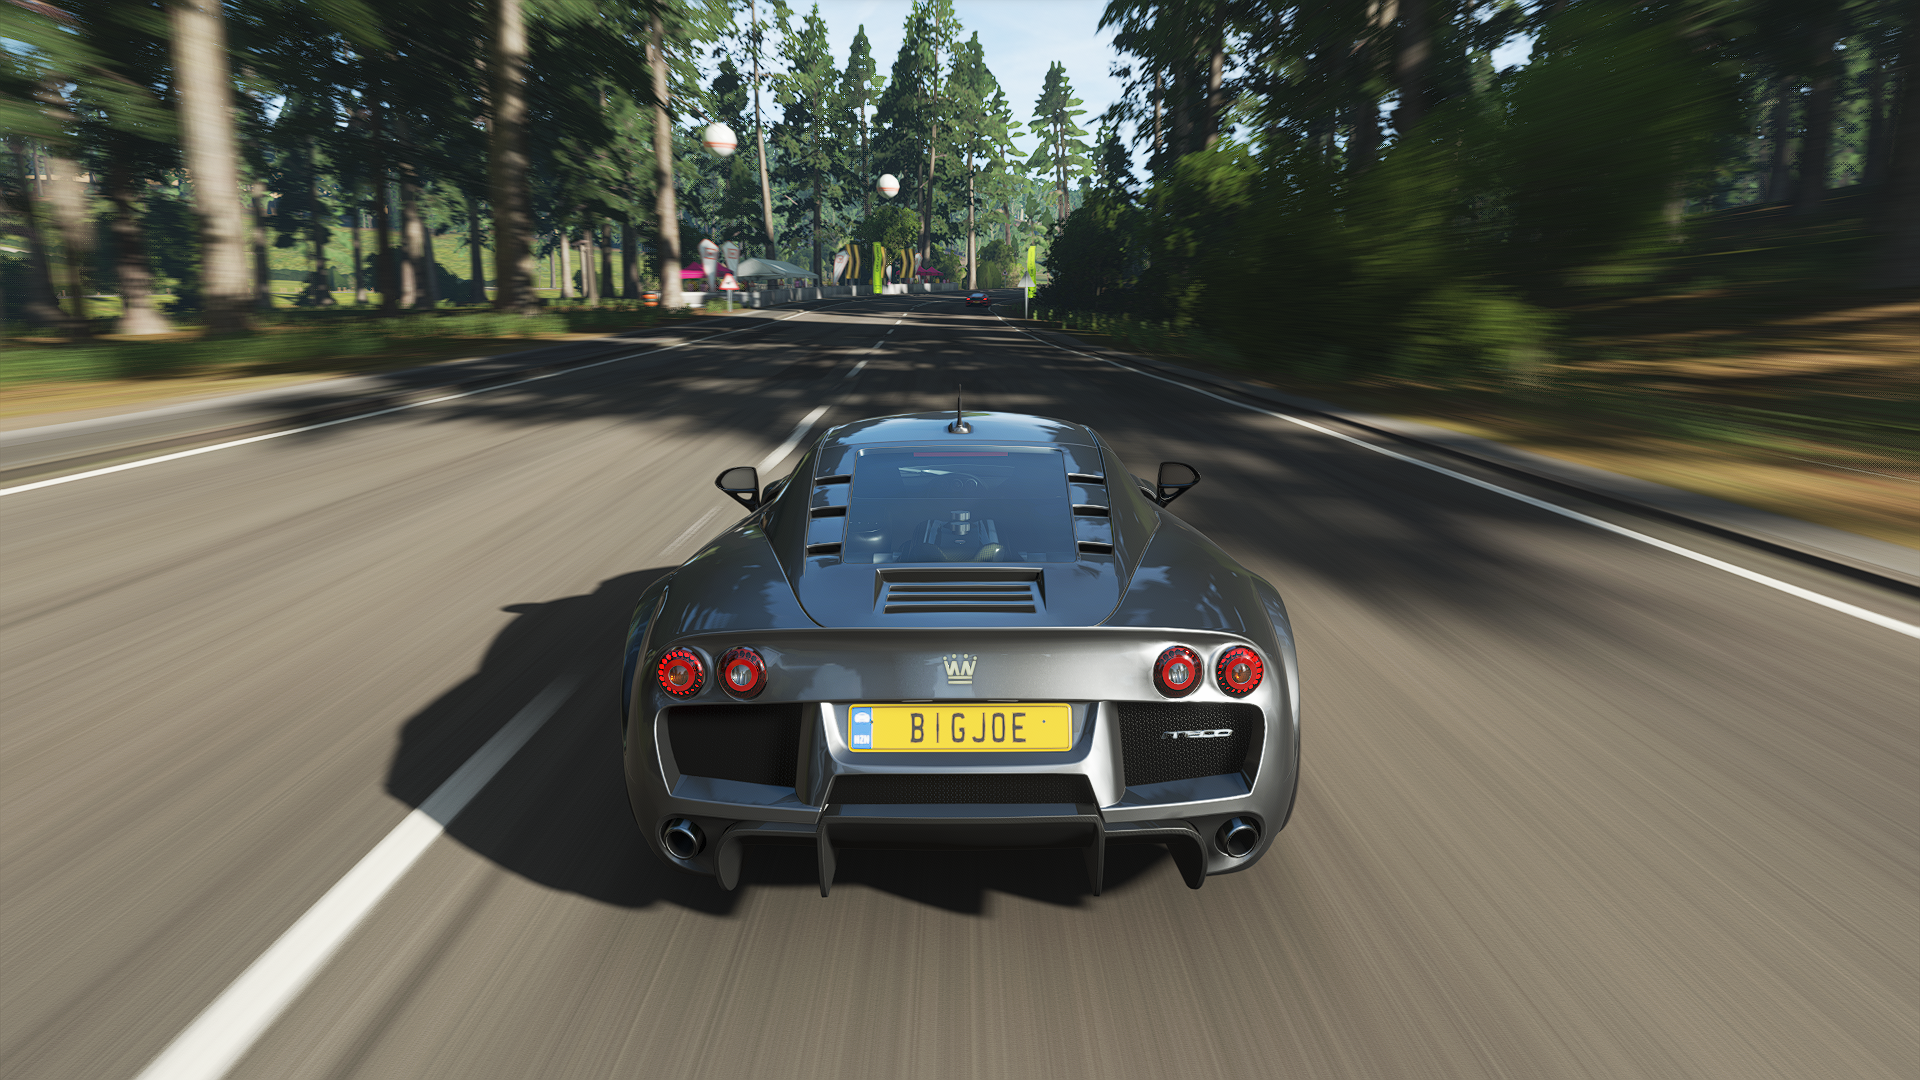 General 1920x1080 Forza Horizon 4 Forza Horizon Forza car driving CGI Noble M600 video games vehicle rear view road licence plates blurred blurry background trees PlaygroundGames British cars